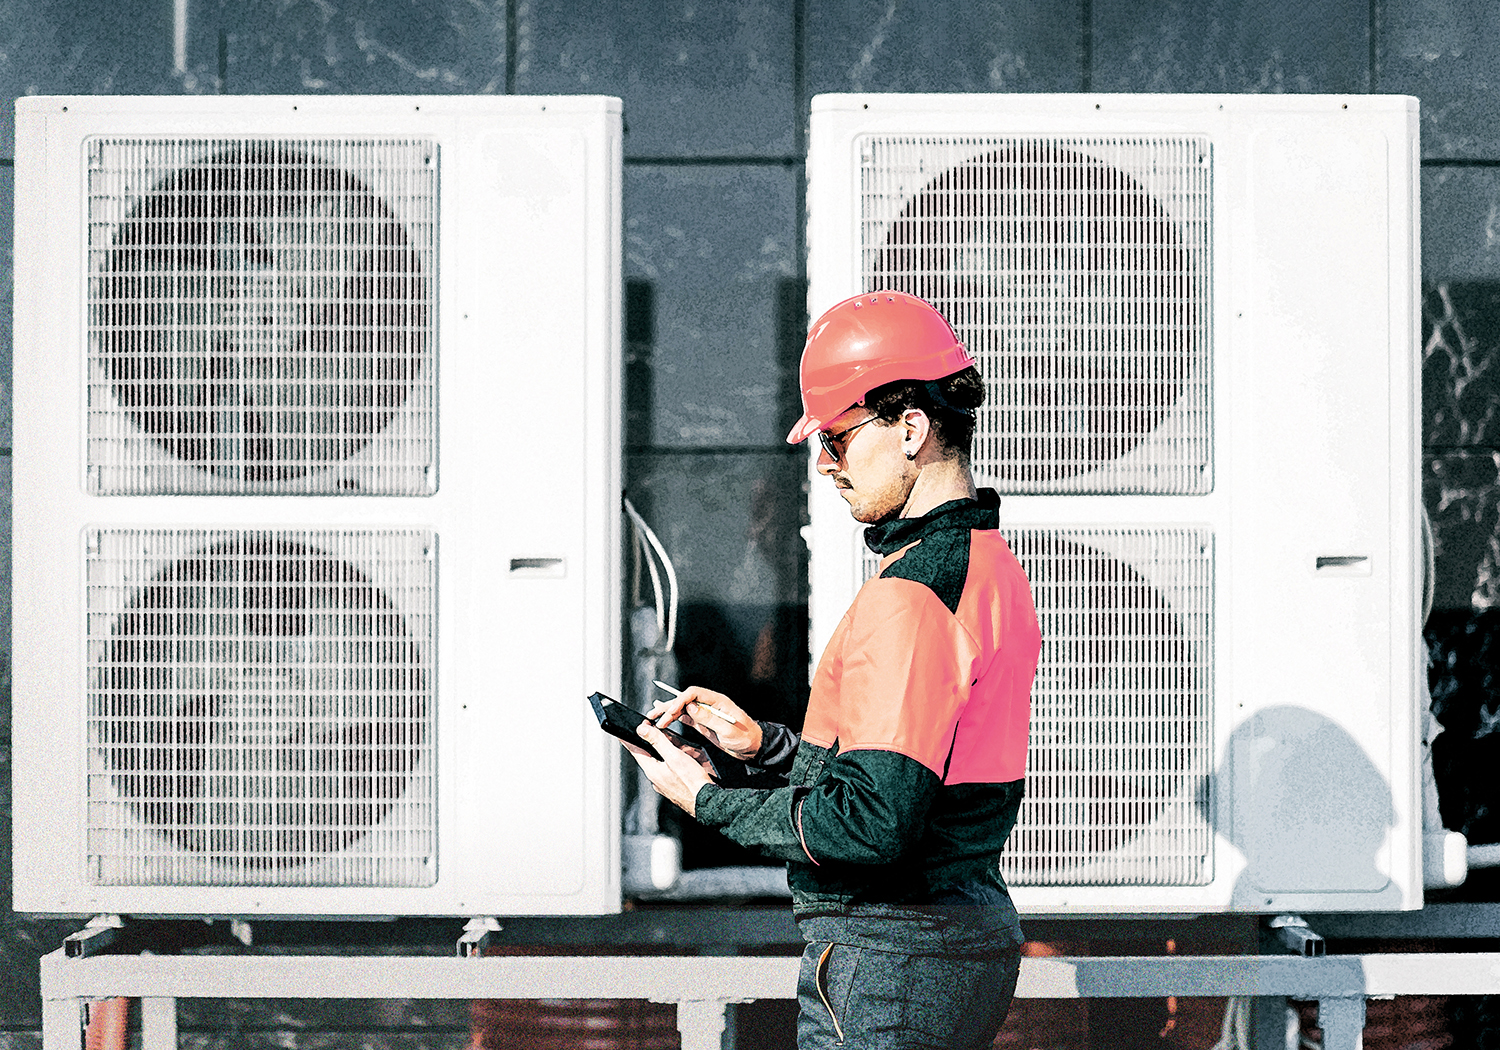 Heat pumps: dispelling the myths